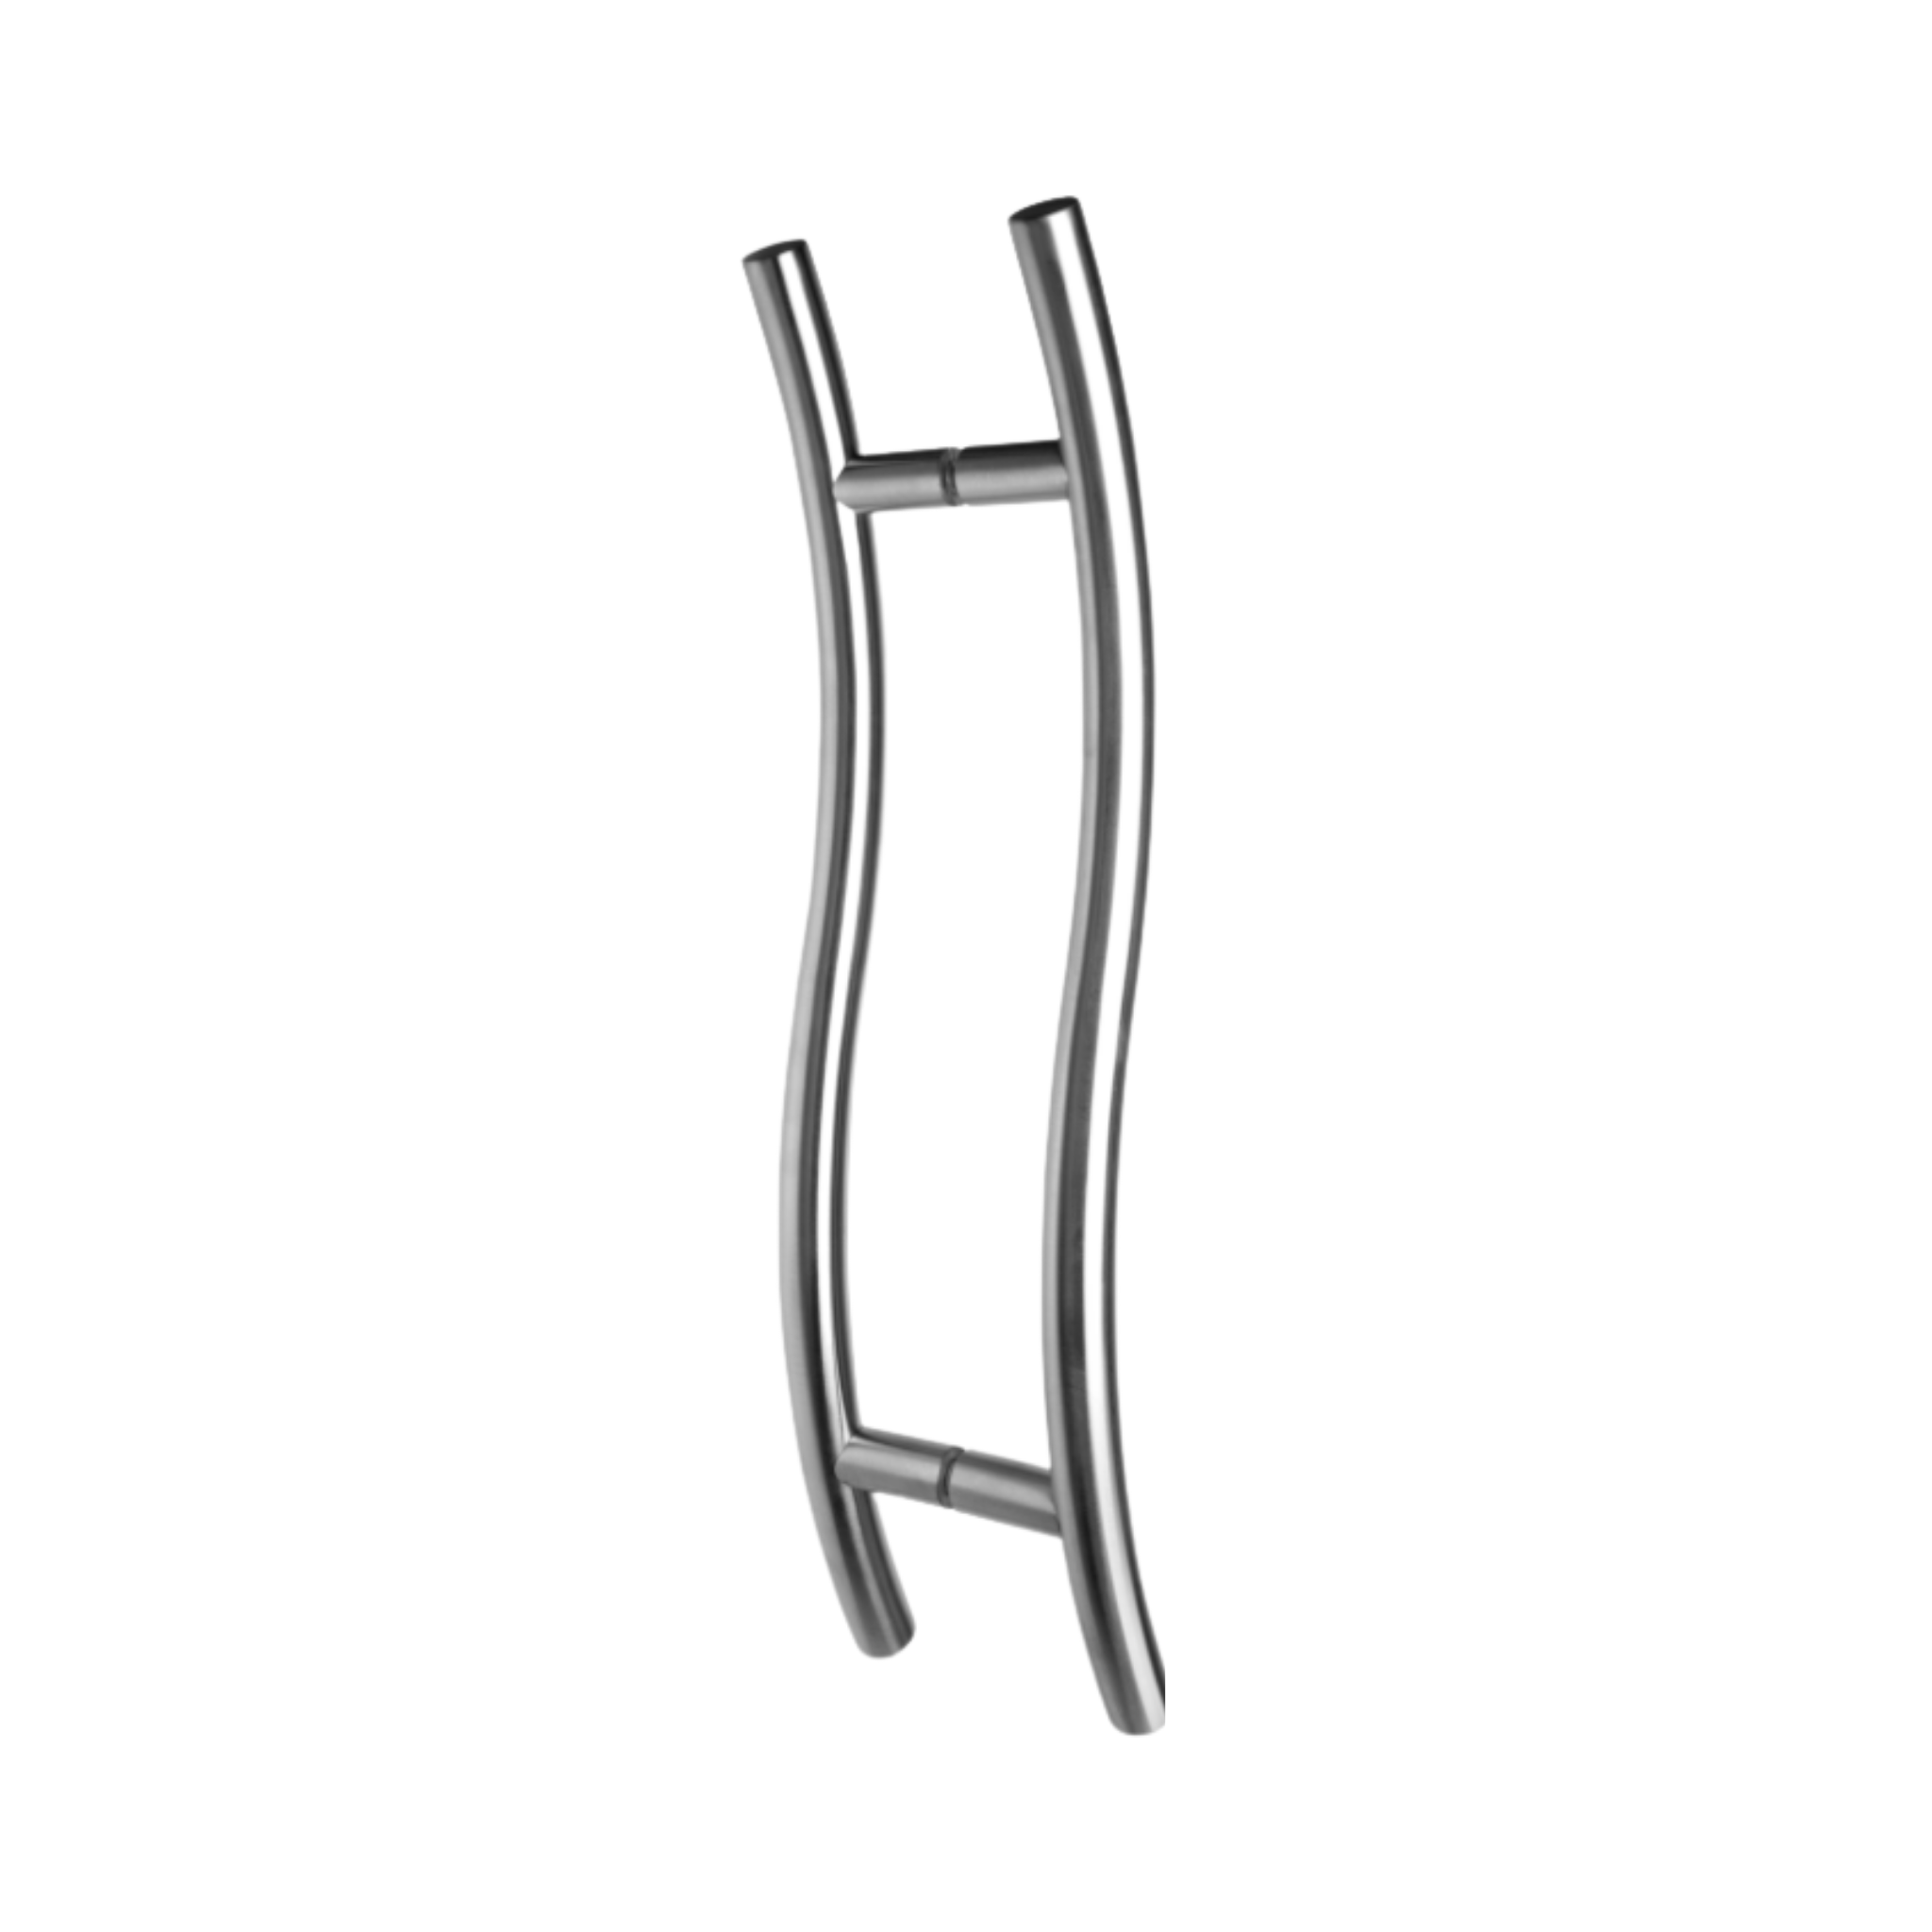 QS2901 S Handle, Pull Handle, Round, S Handle, BTB, 25mm (Ø) x 600mm (l) x 400mm (ctc), Stainless Steel, QS